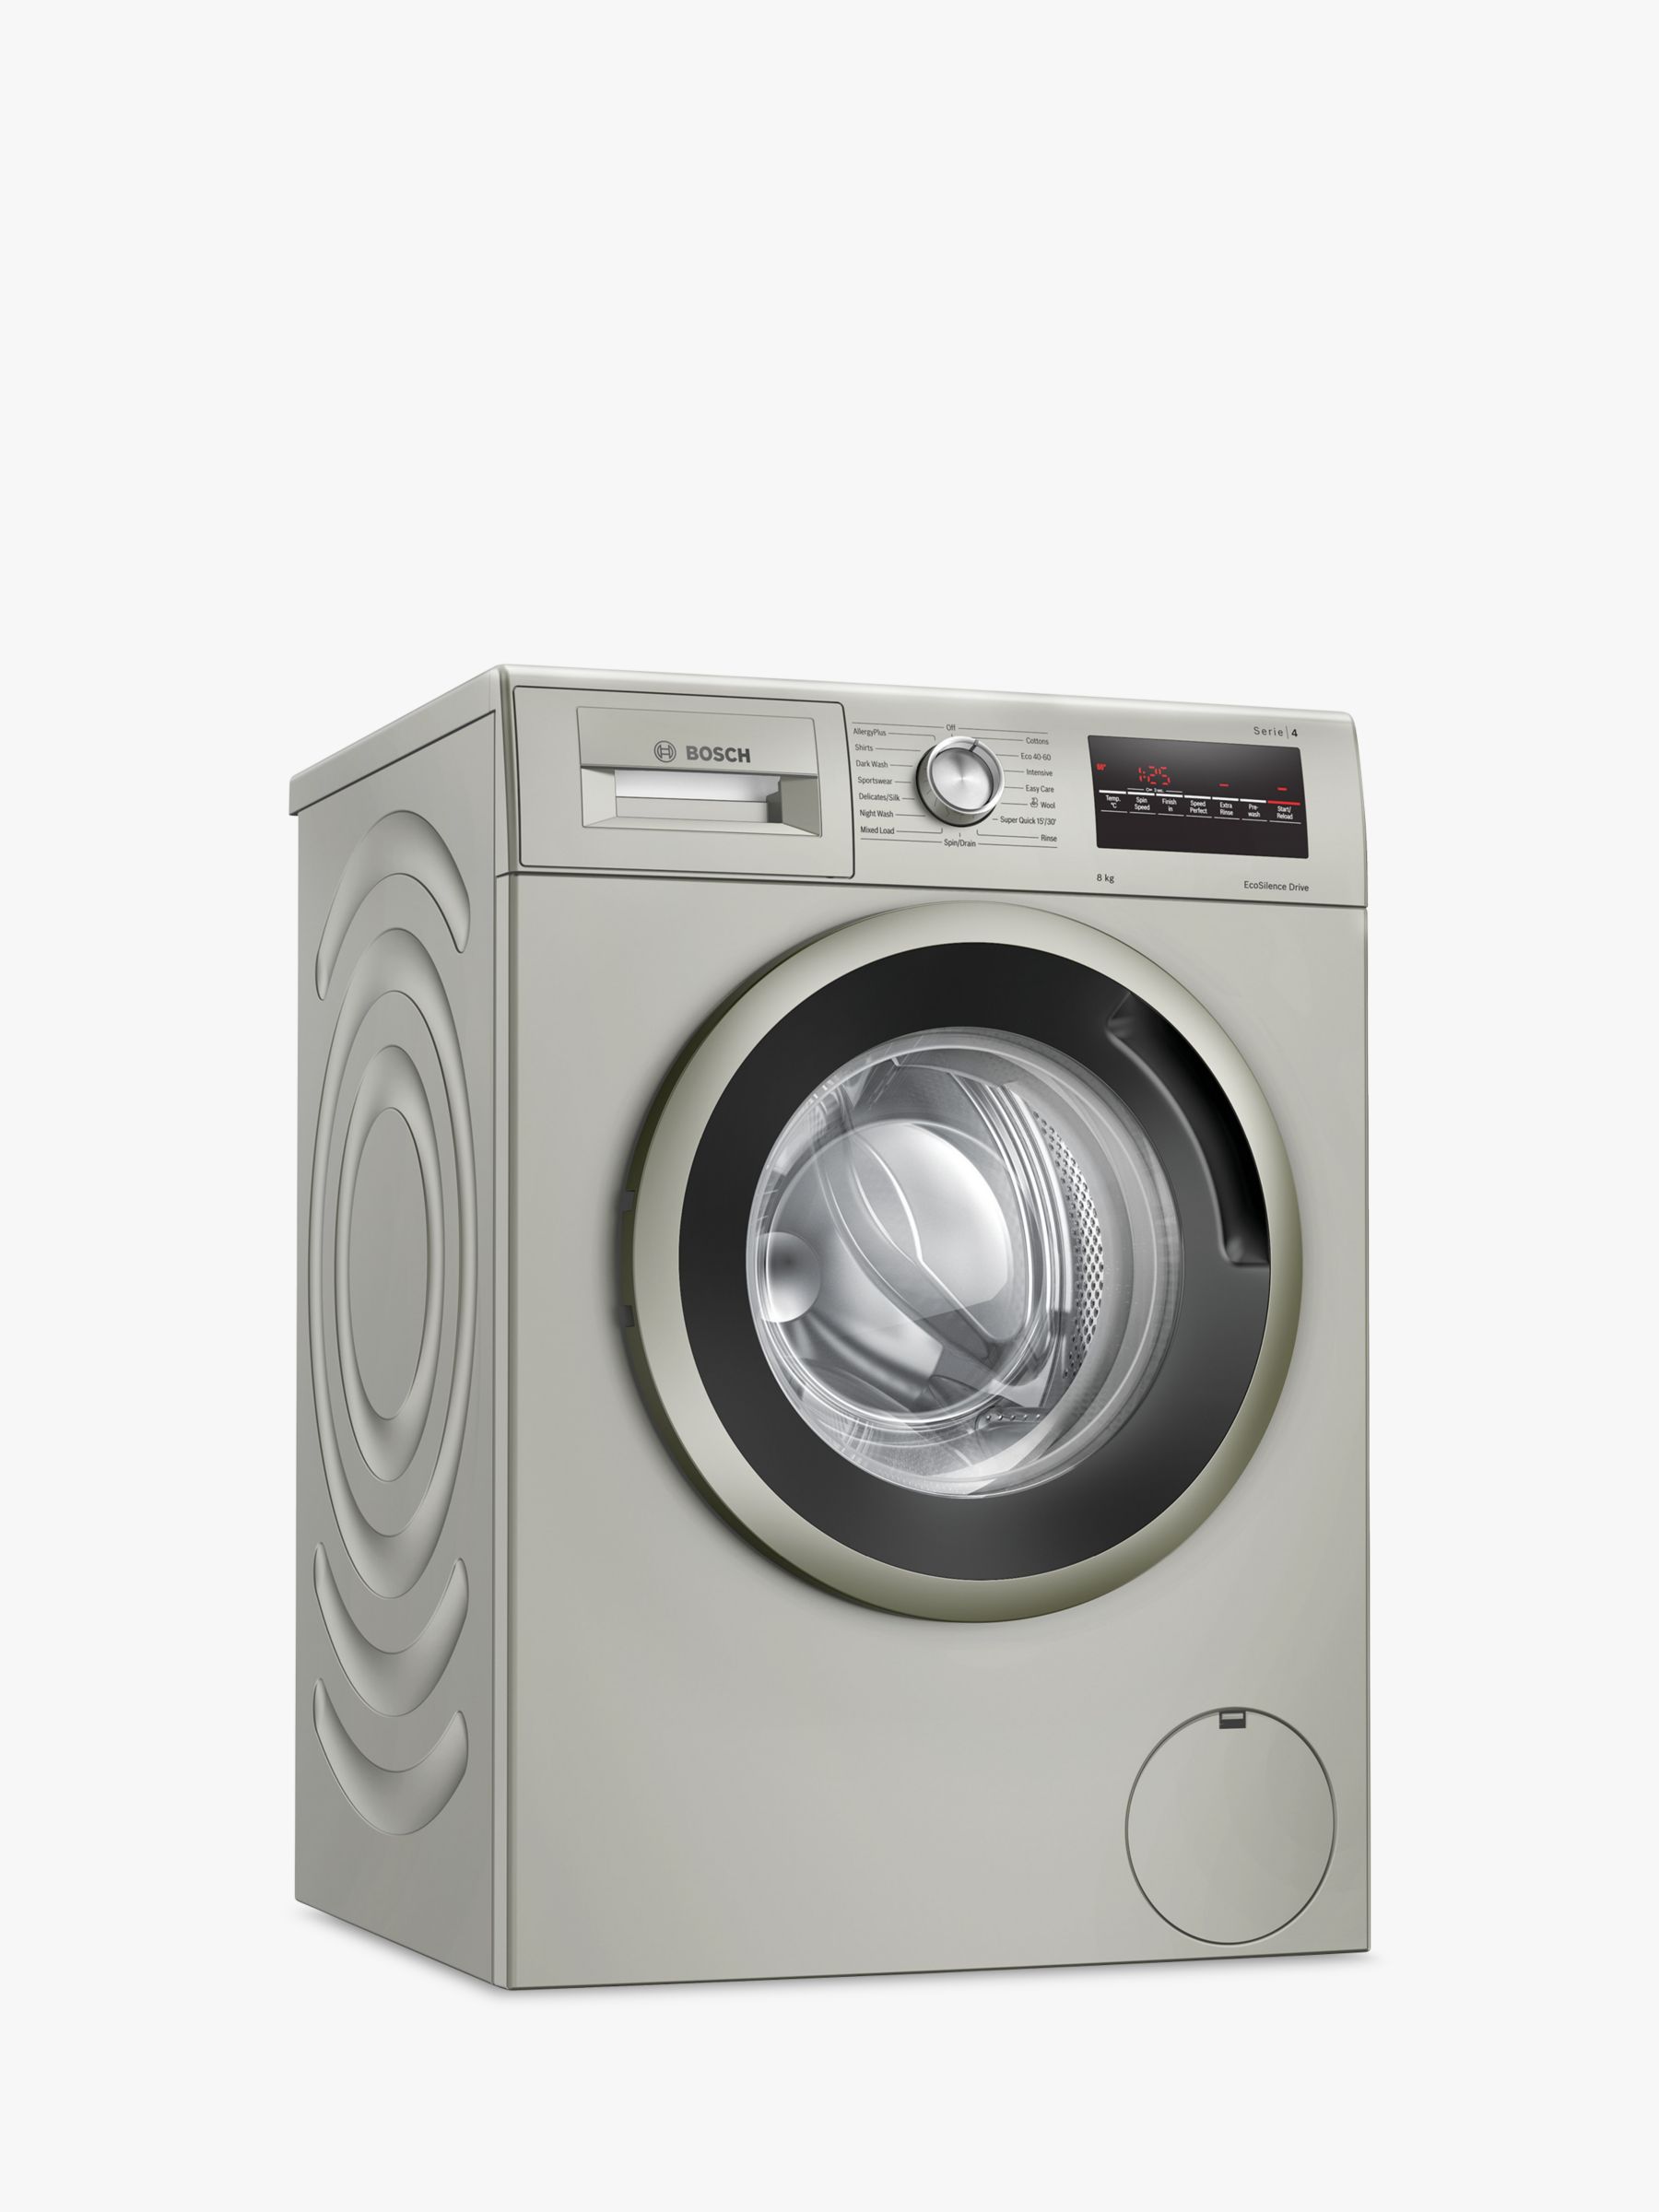 Bosch WAN282X1GB Freestanding Washing Machine, 8kg Load, A+++ Energy Rating, 1400rpm Spin, Silver